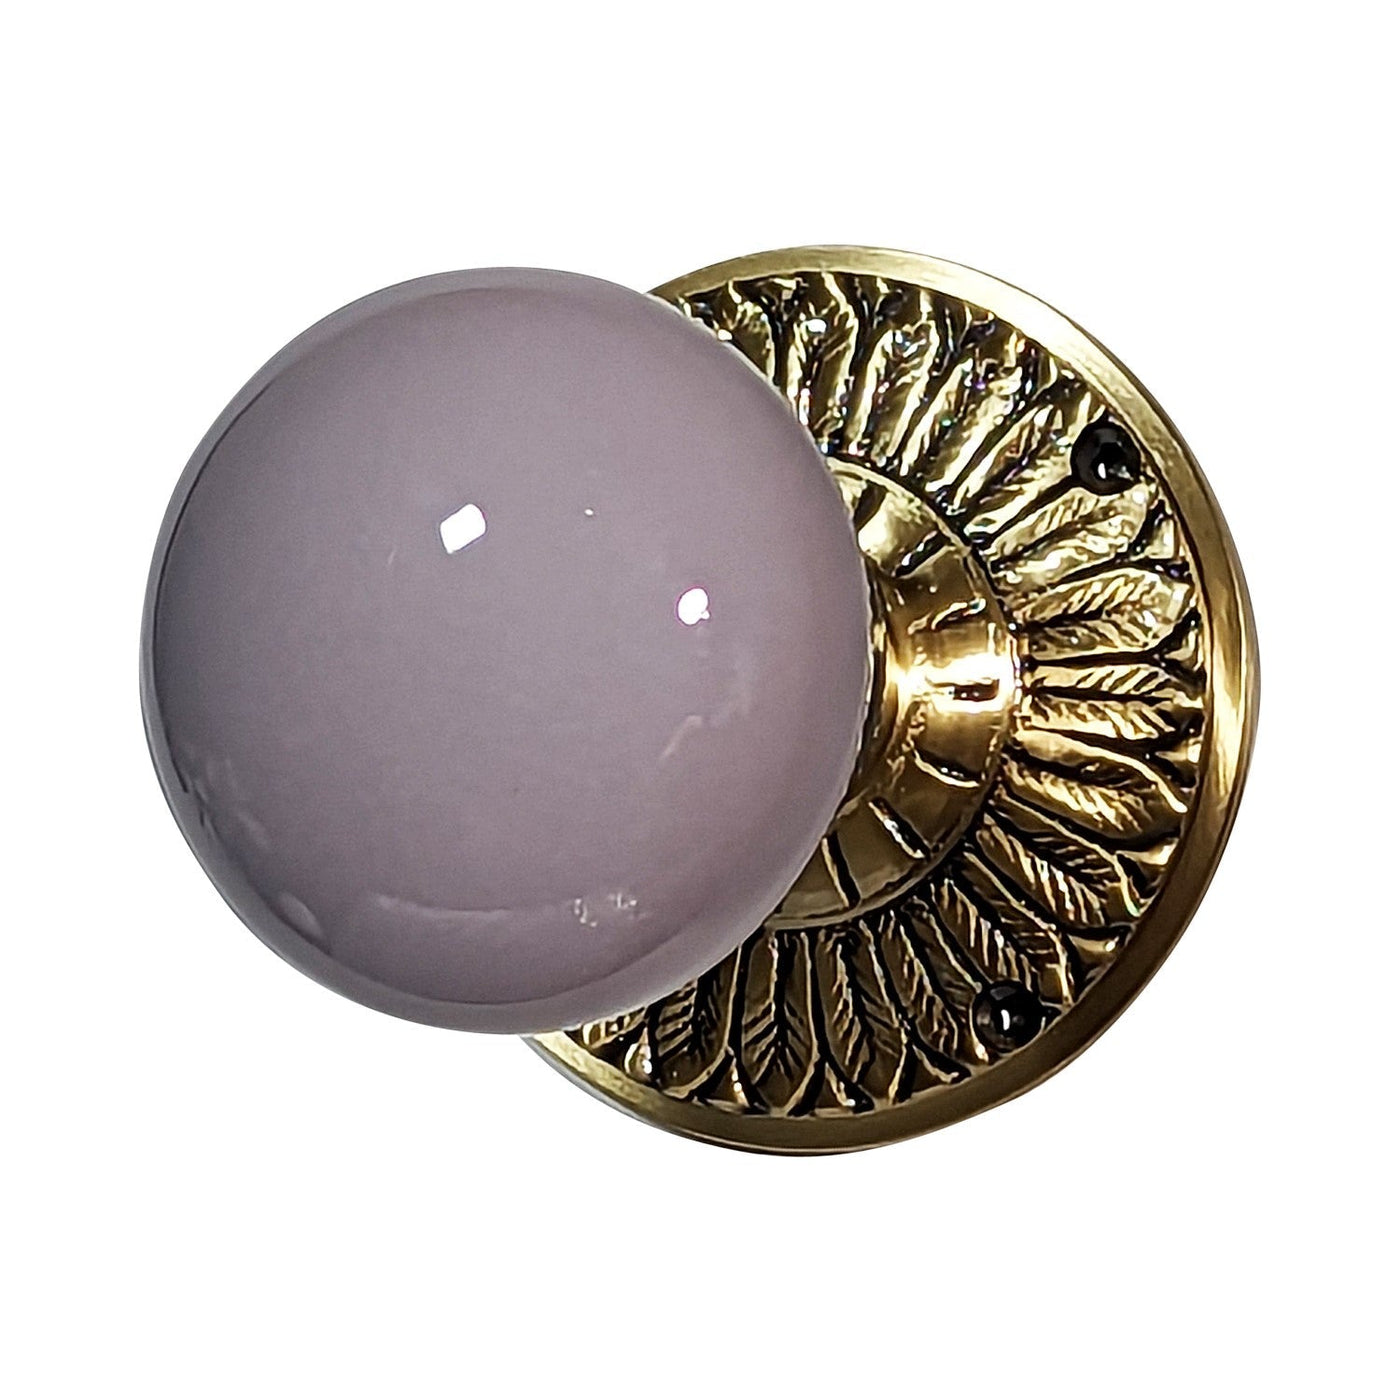 Grey Porcelain Door Knob with Brass Feathers Rosette